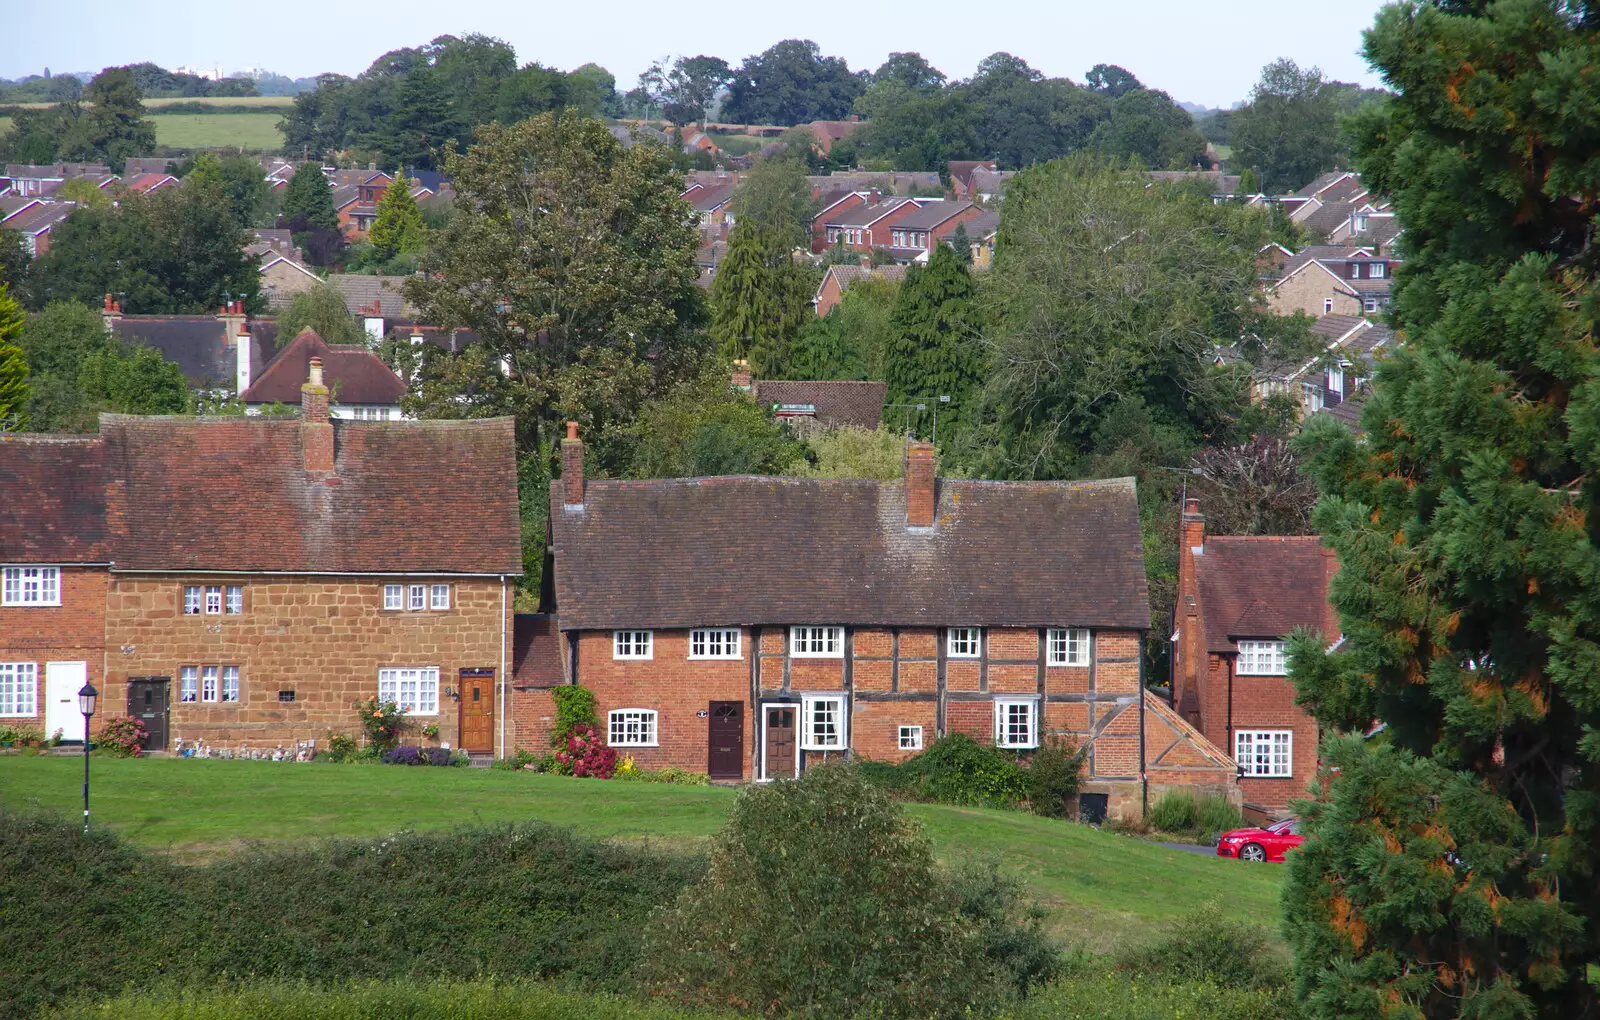 The village of Kenilworth, from Kenilworth Castle and the 69th Entry Reunion Dinner, Stratford, Warwickshire - 14th September 2019